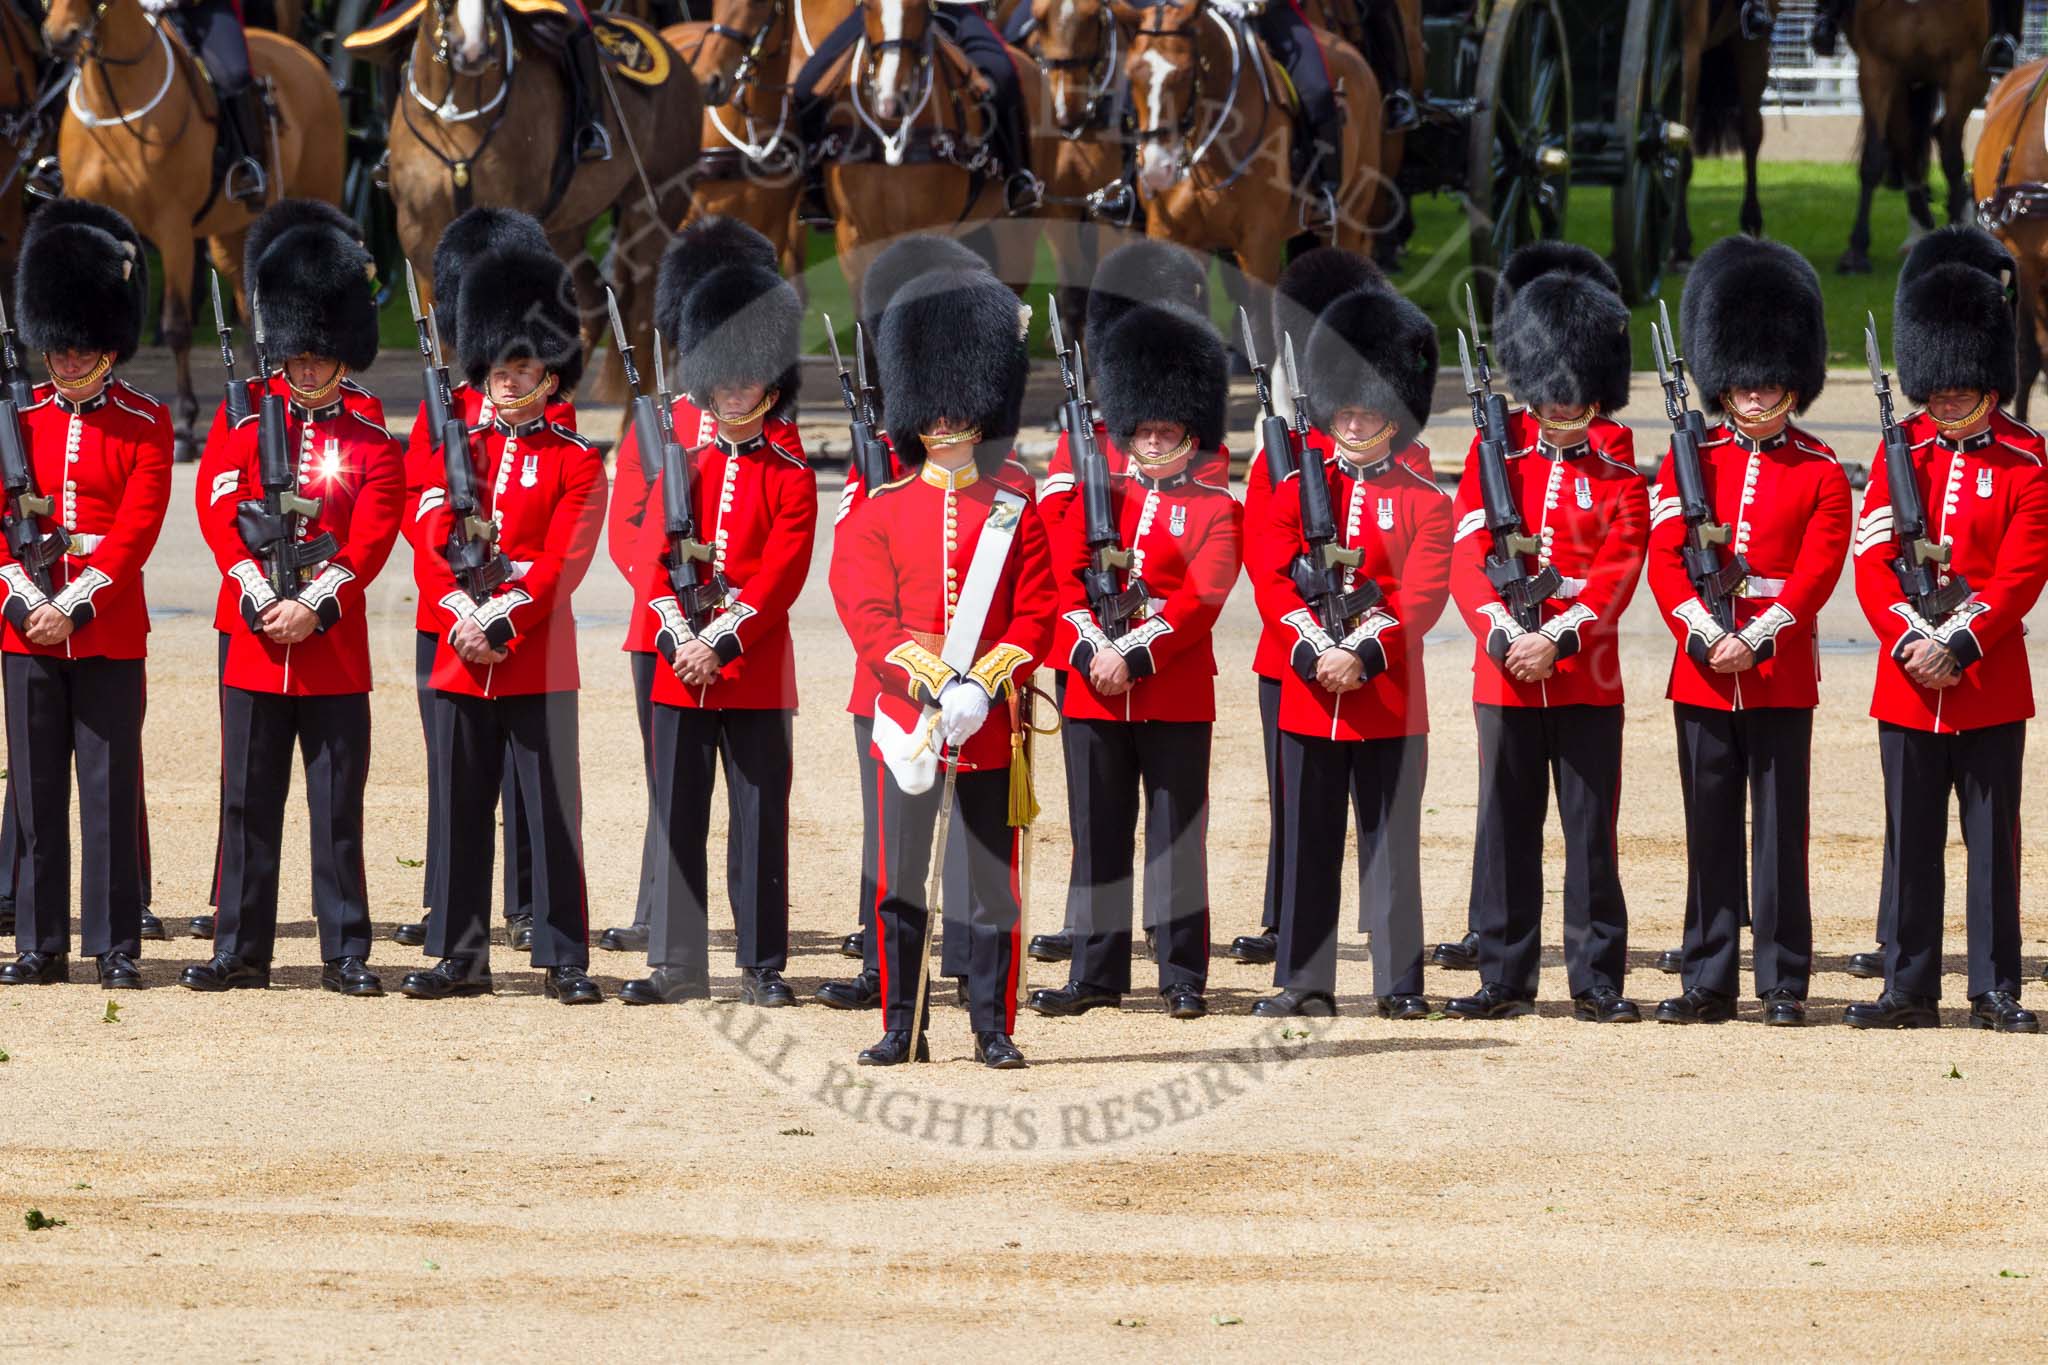 The Colonel's Review 2015.
Horse Guards Parade, Westminster,
London,

United Kingdom,
on 06 June 2015 at 10:47, image #140